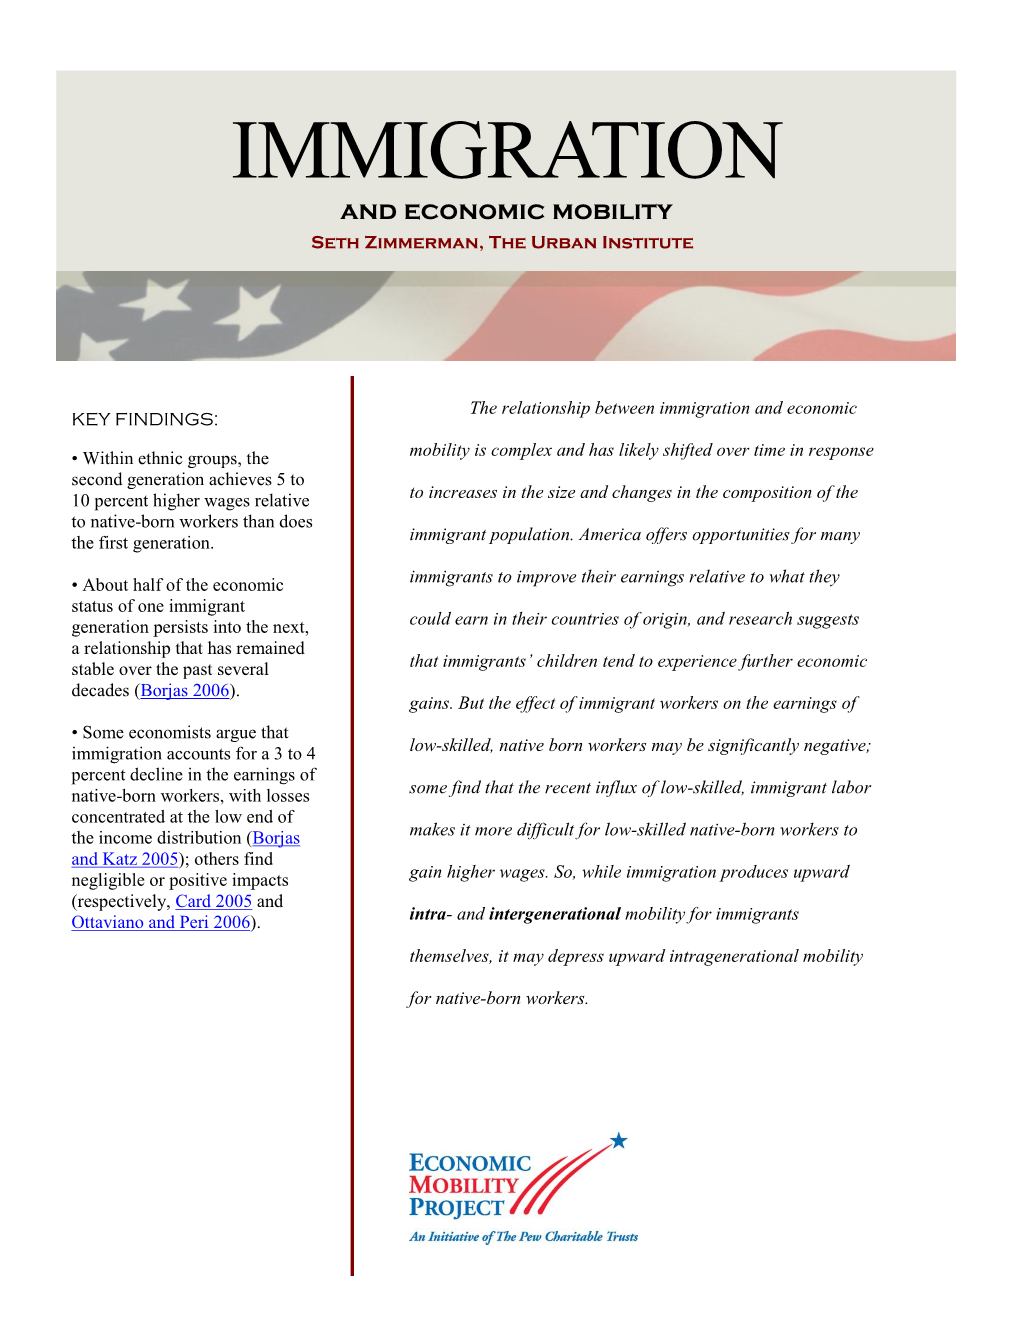 IMMIGRATION and Economic Mobility